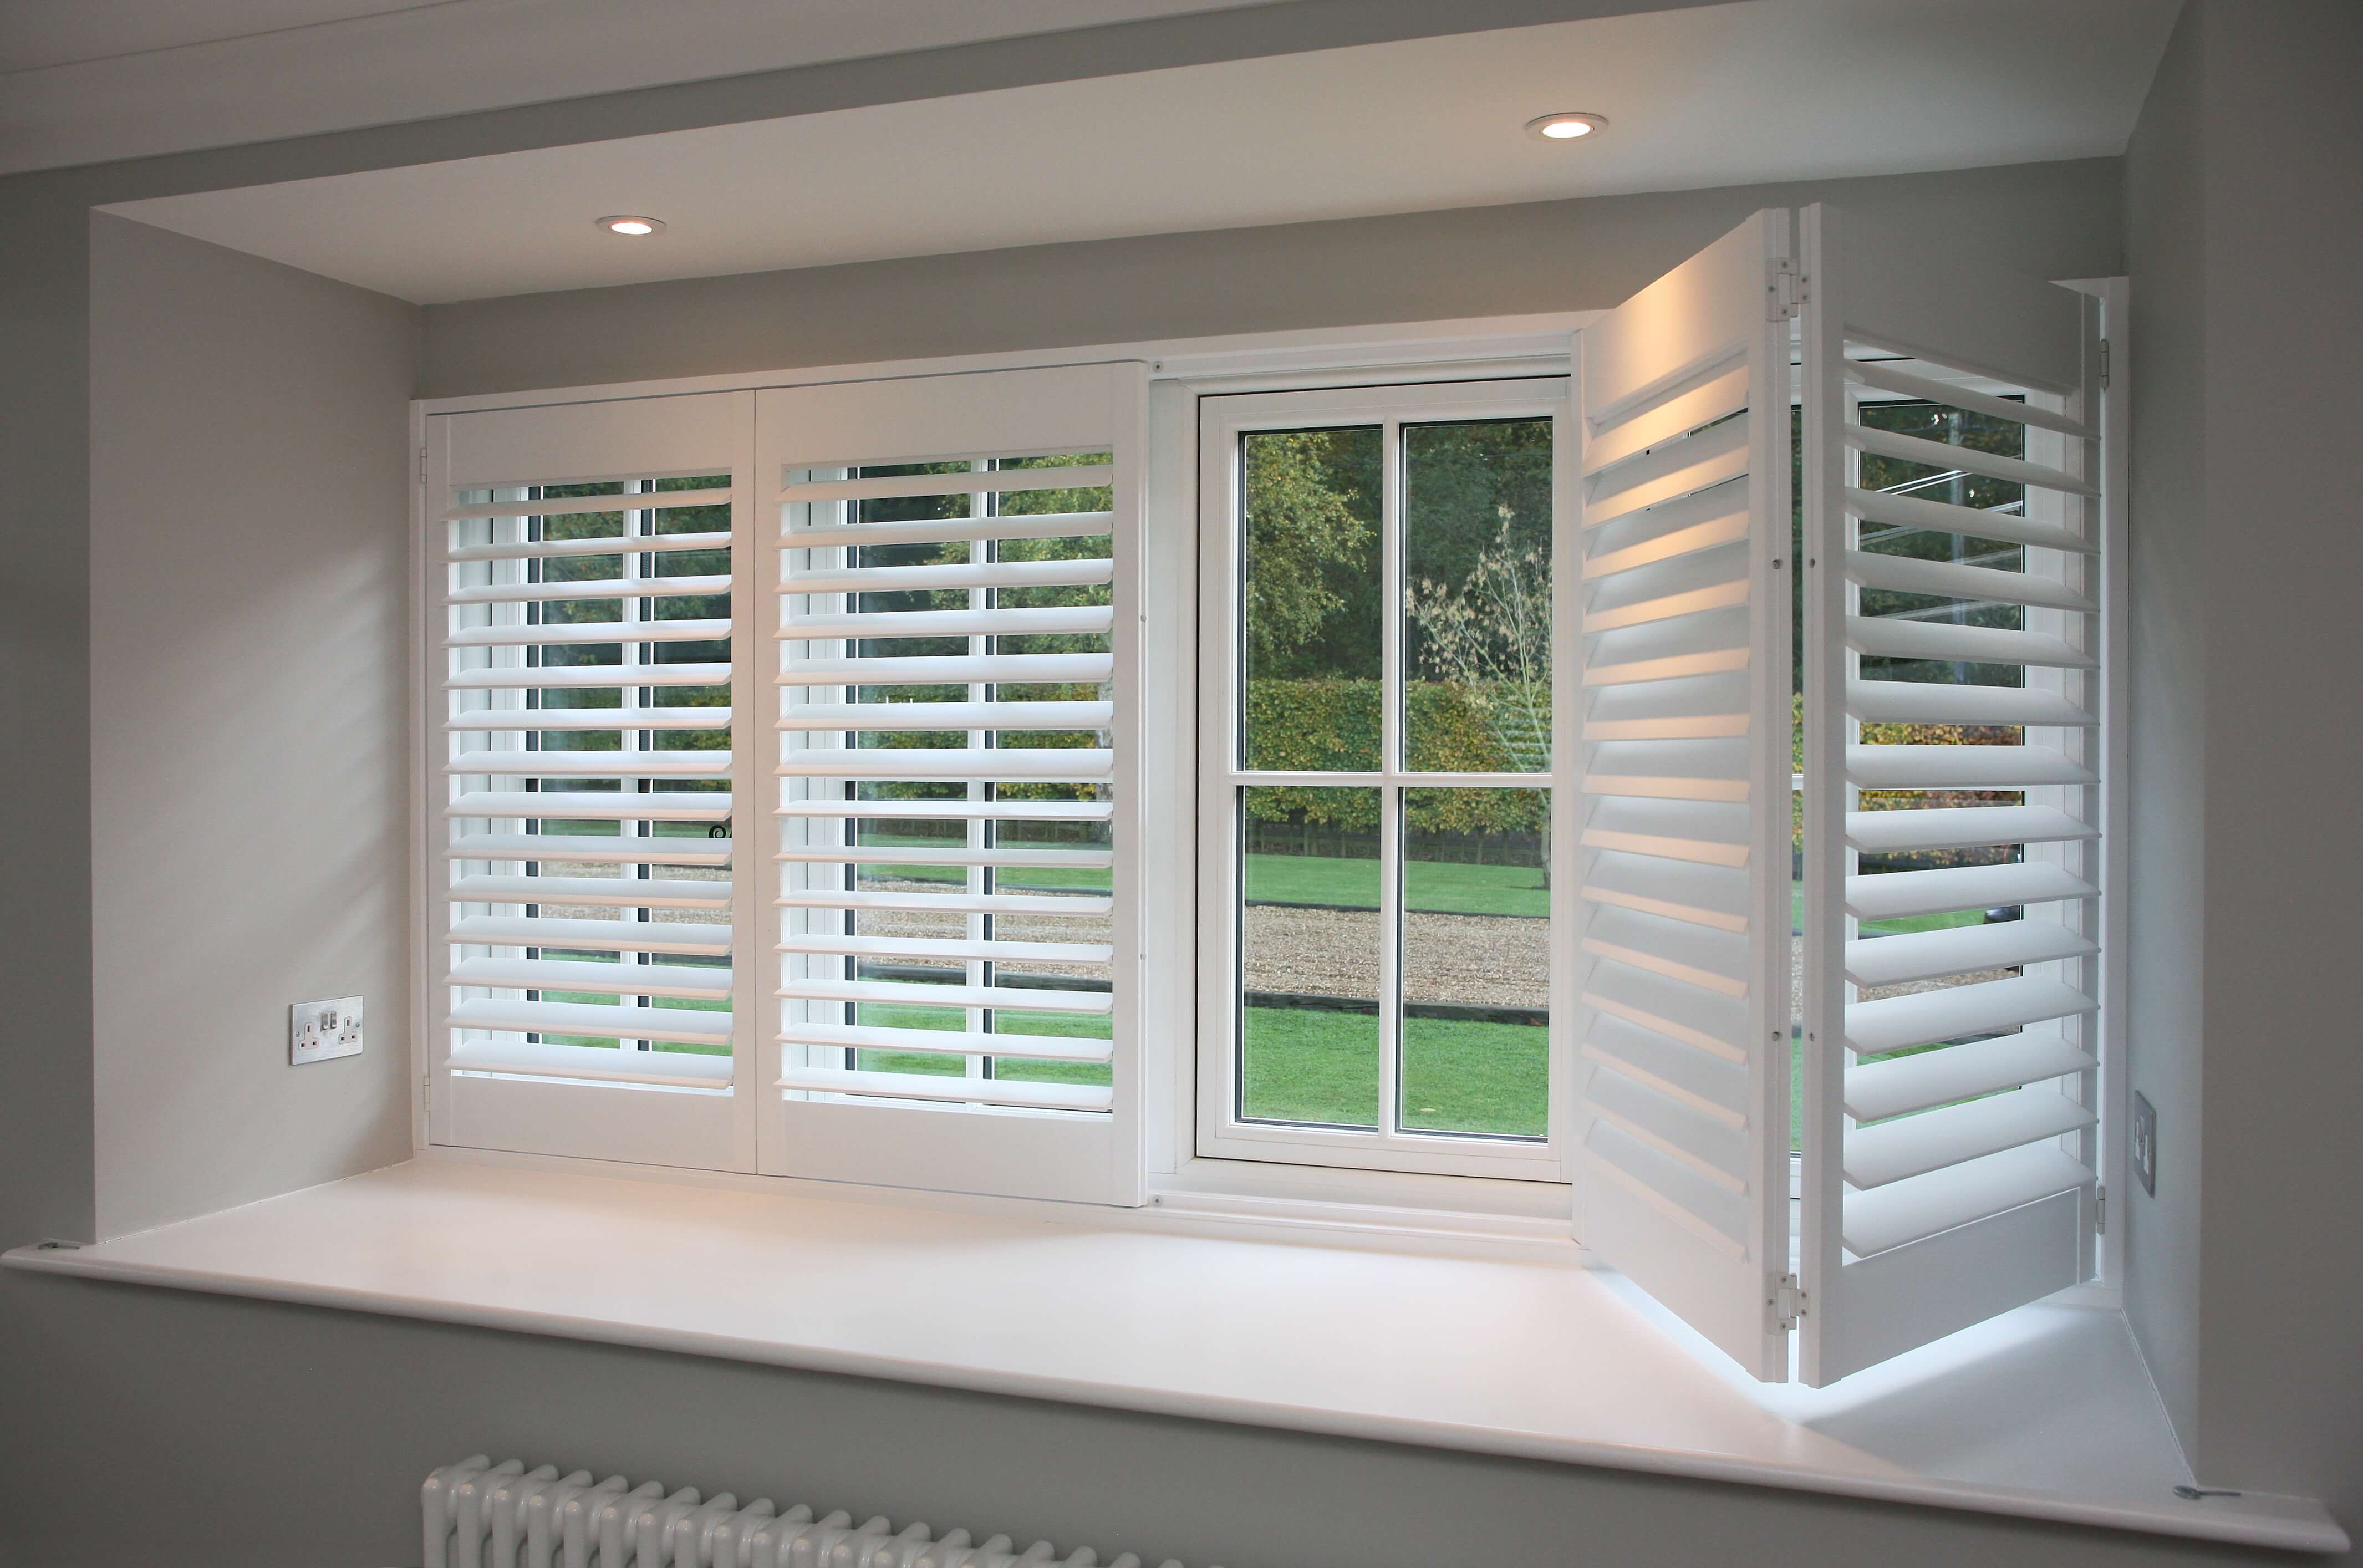 Made to Measure Window Shutters in Essex, UK Our Gallery